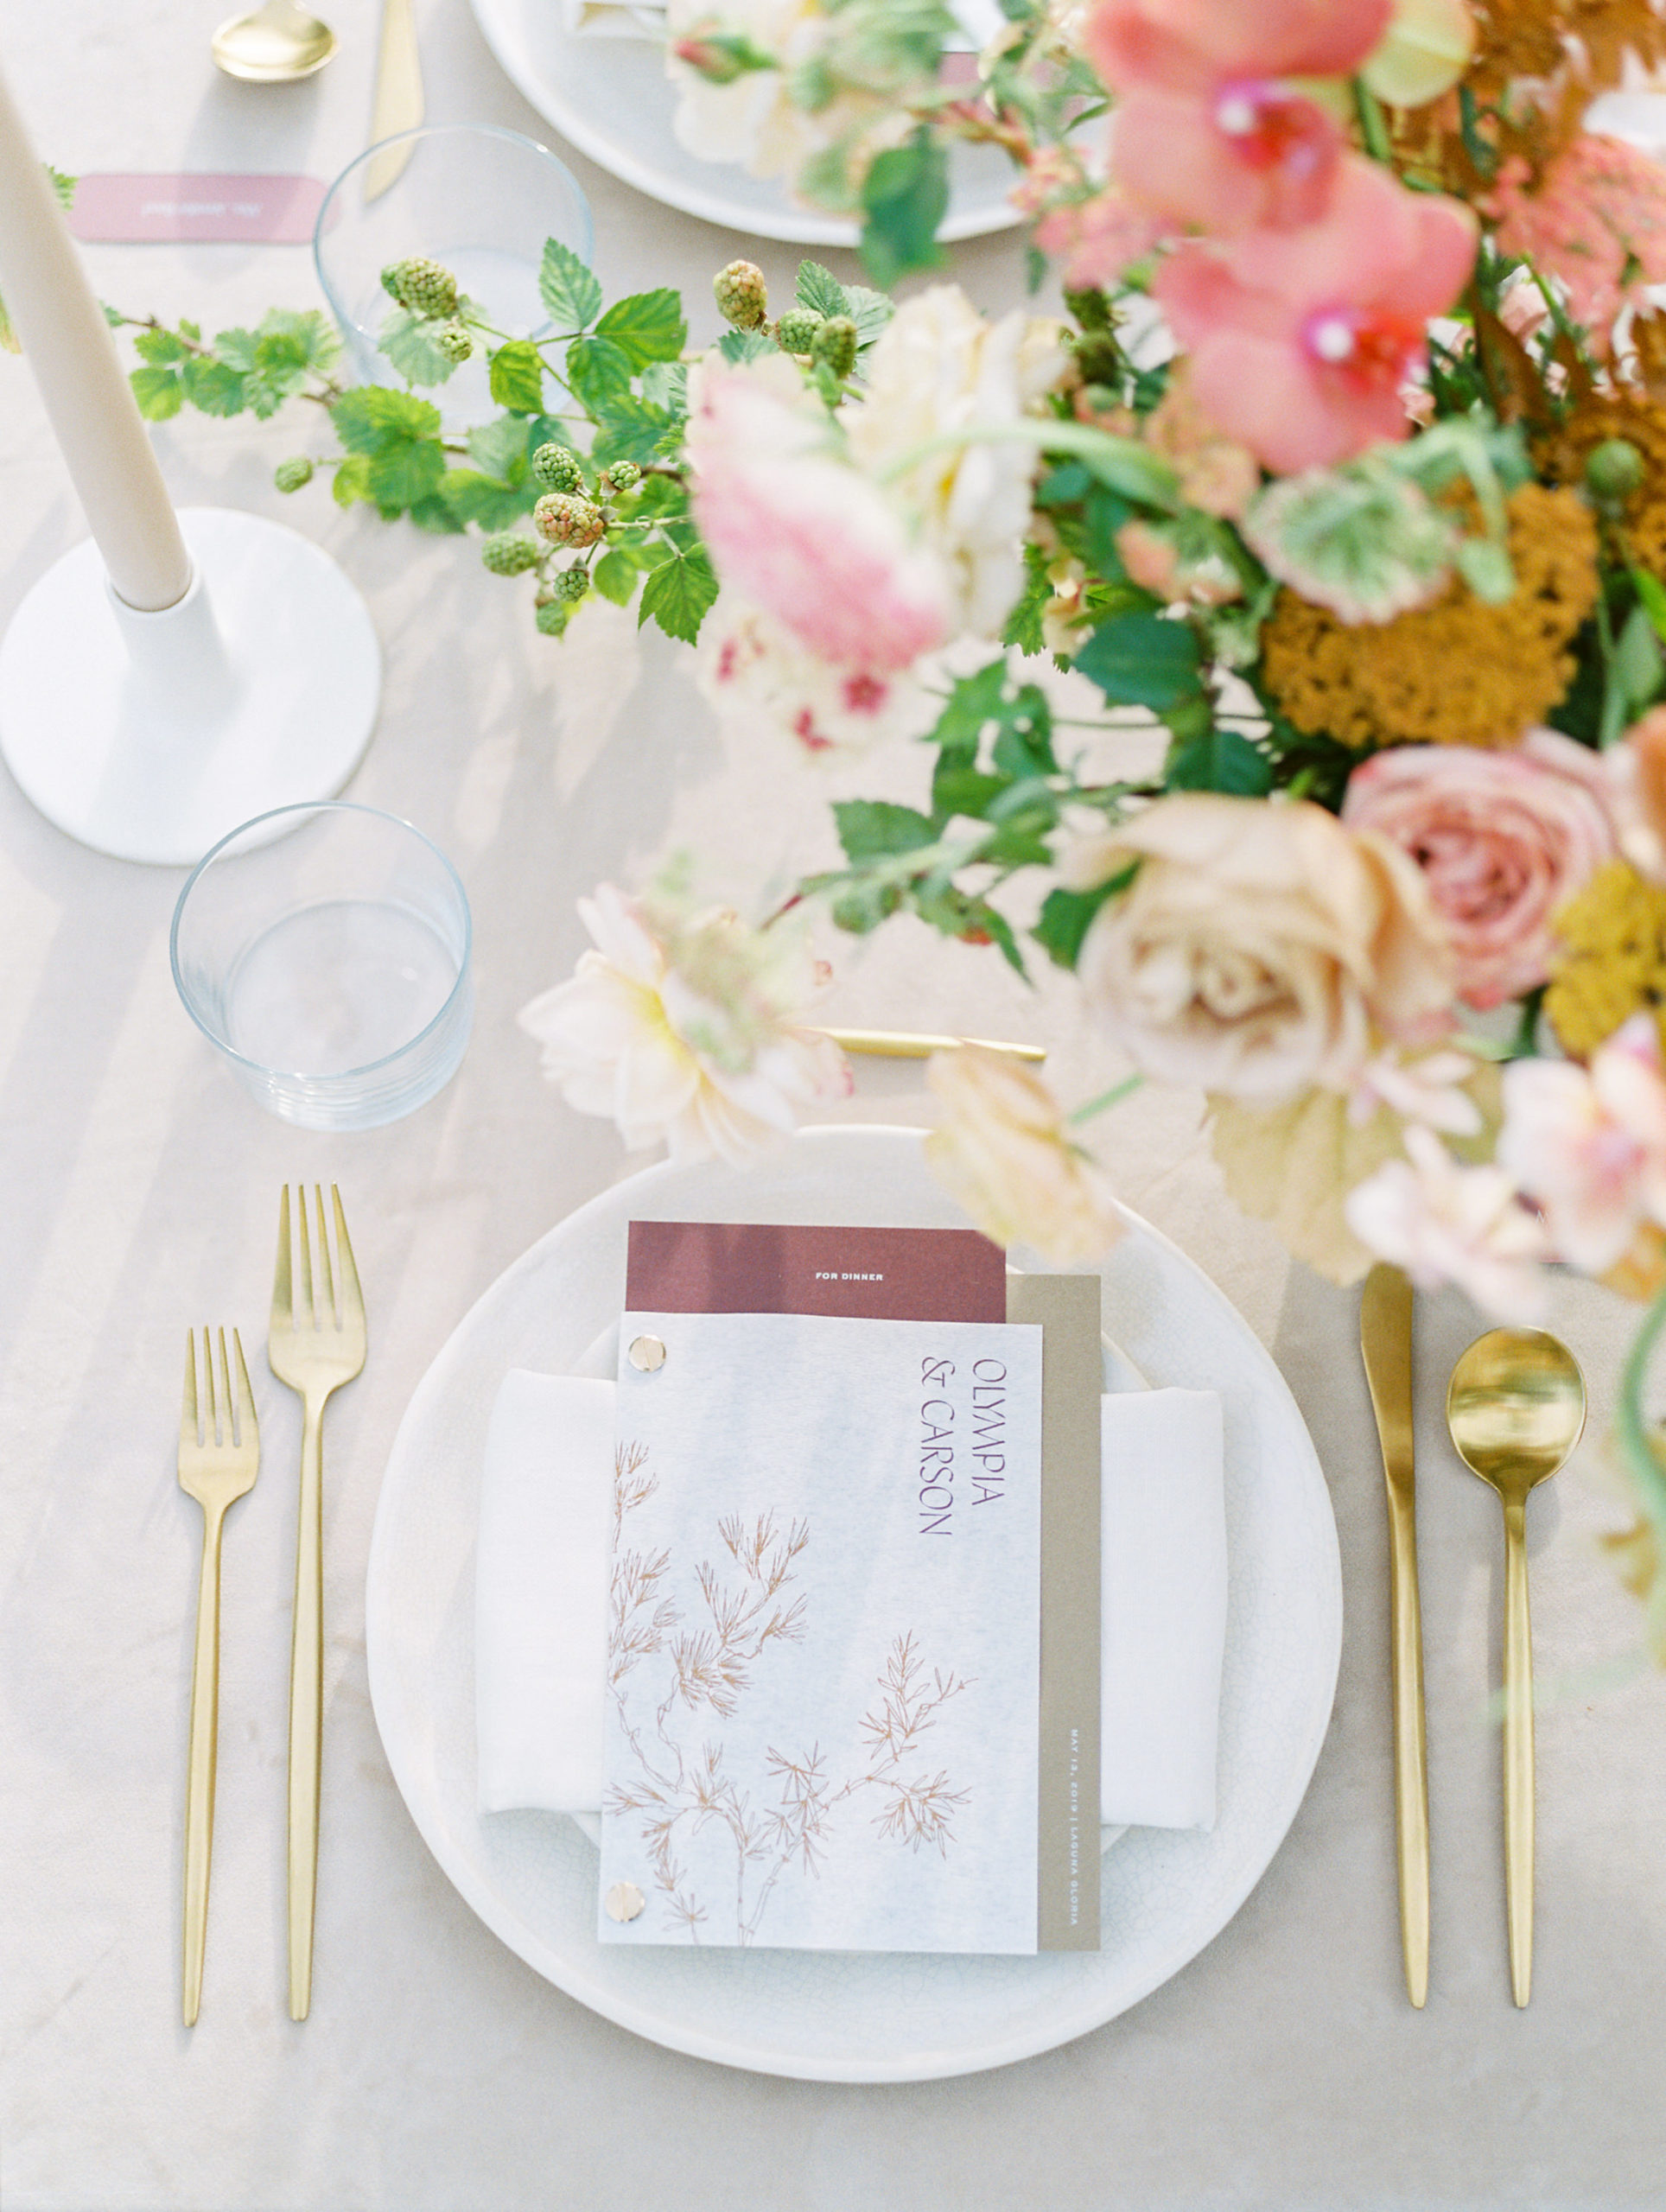 Close-up shot of the wedding reception table with a floral centerpiece, a plate, napkin and a menu with golden utensils